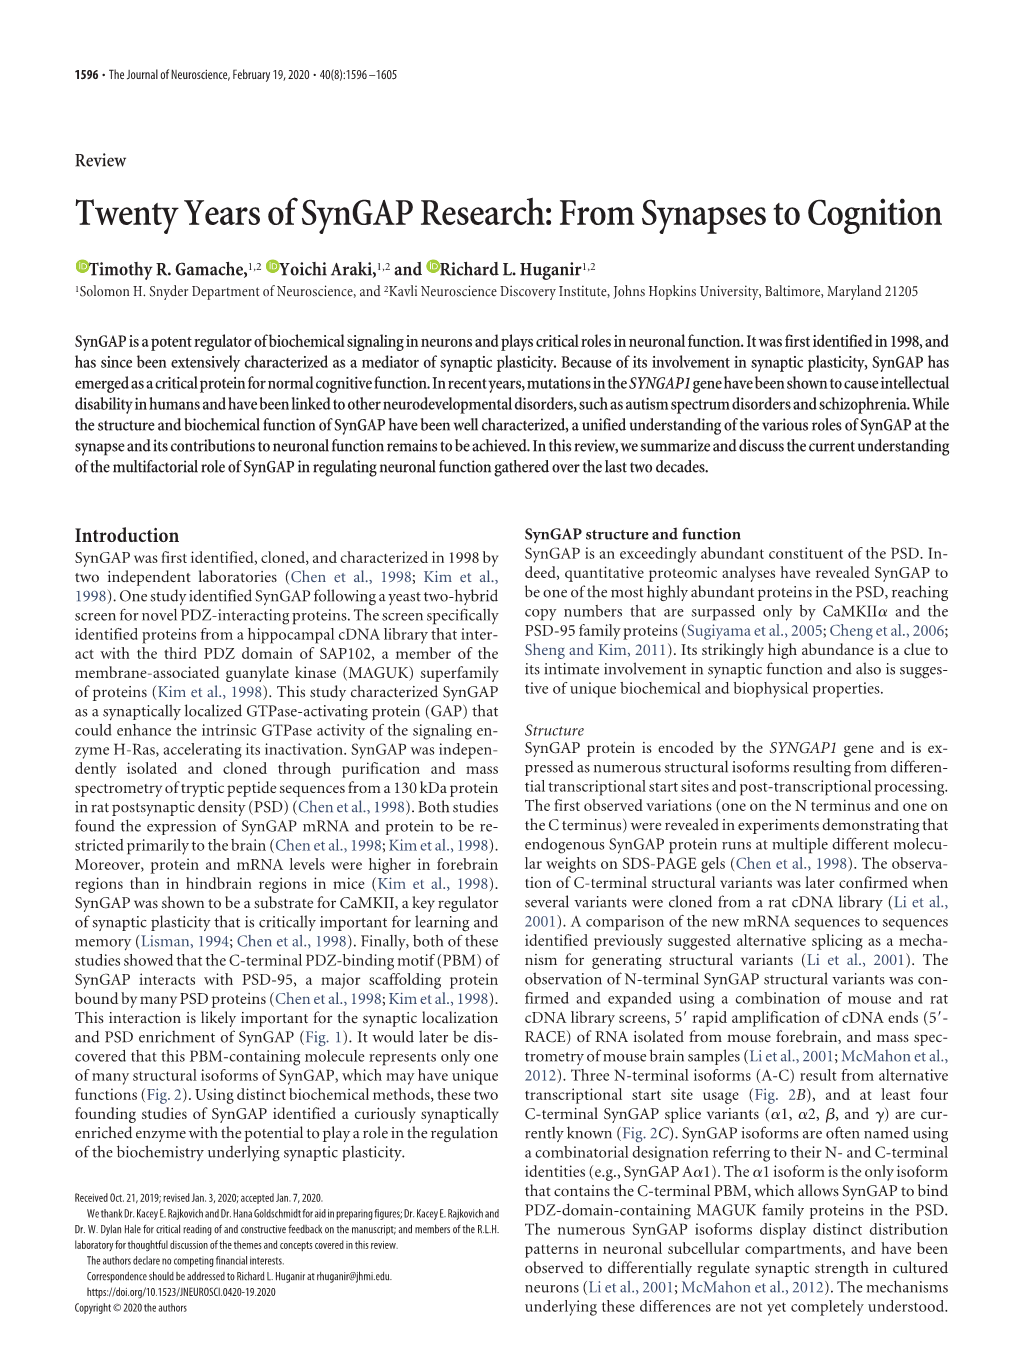 Twenty Years of Syngap Research: from Synapses to Cognition